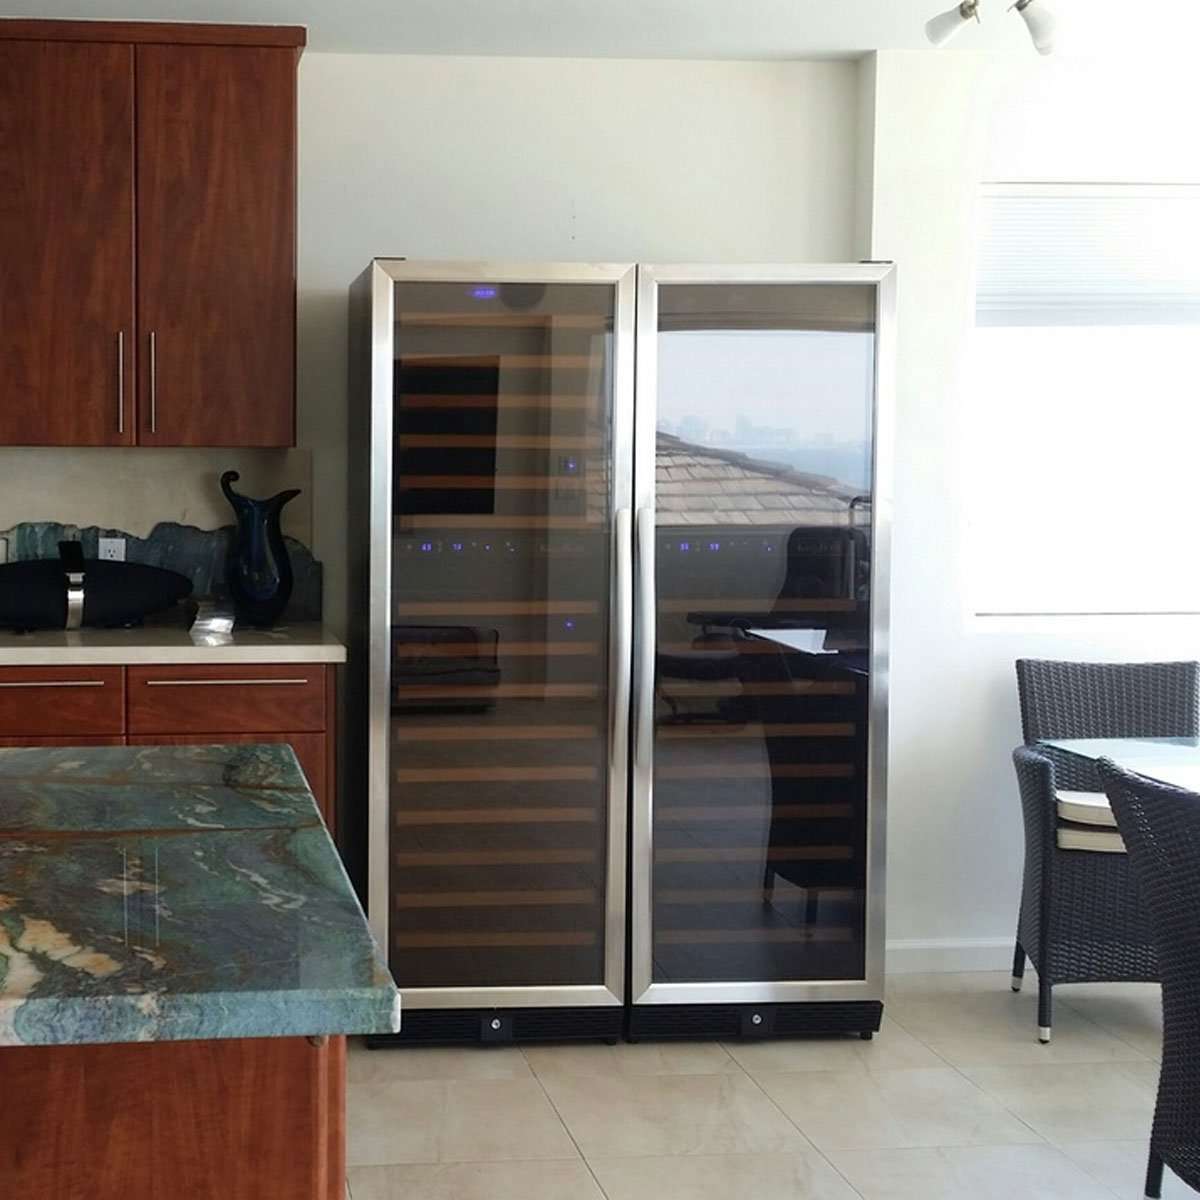 KingsBottle 72" Tall Beer And Wine Refrigerator Combo With Glass Door with Stainless Steel Trim